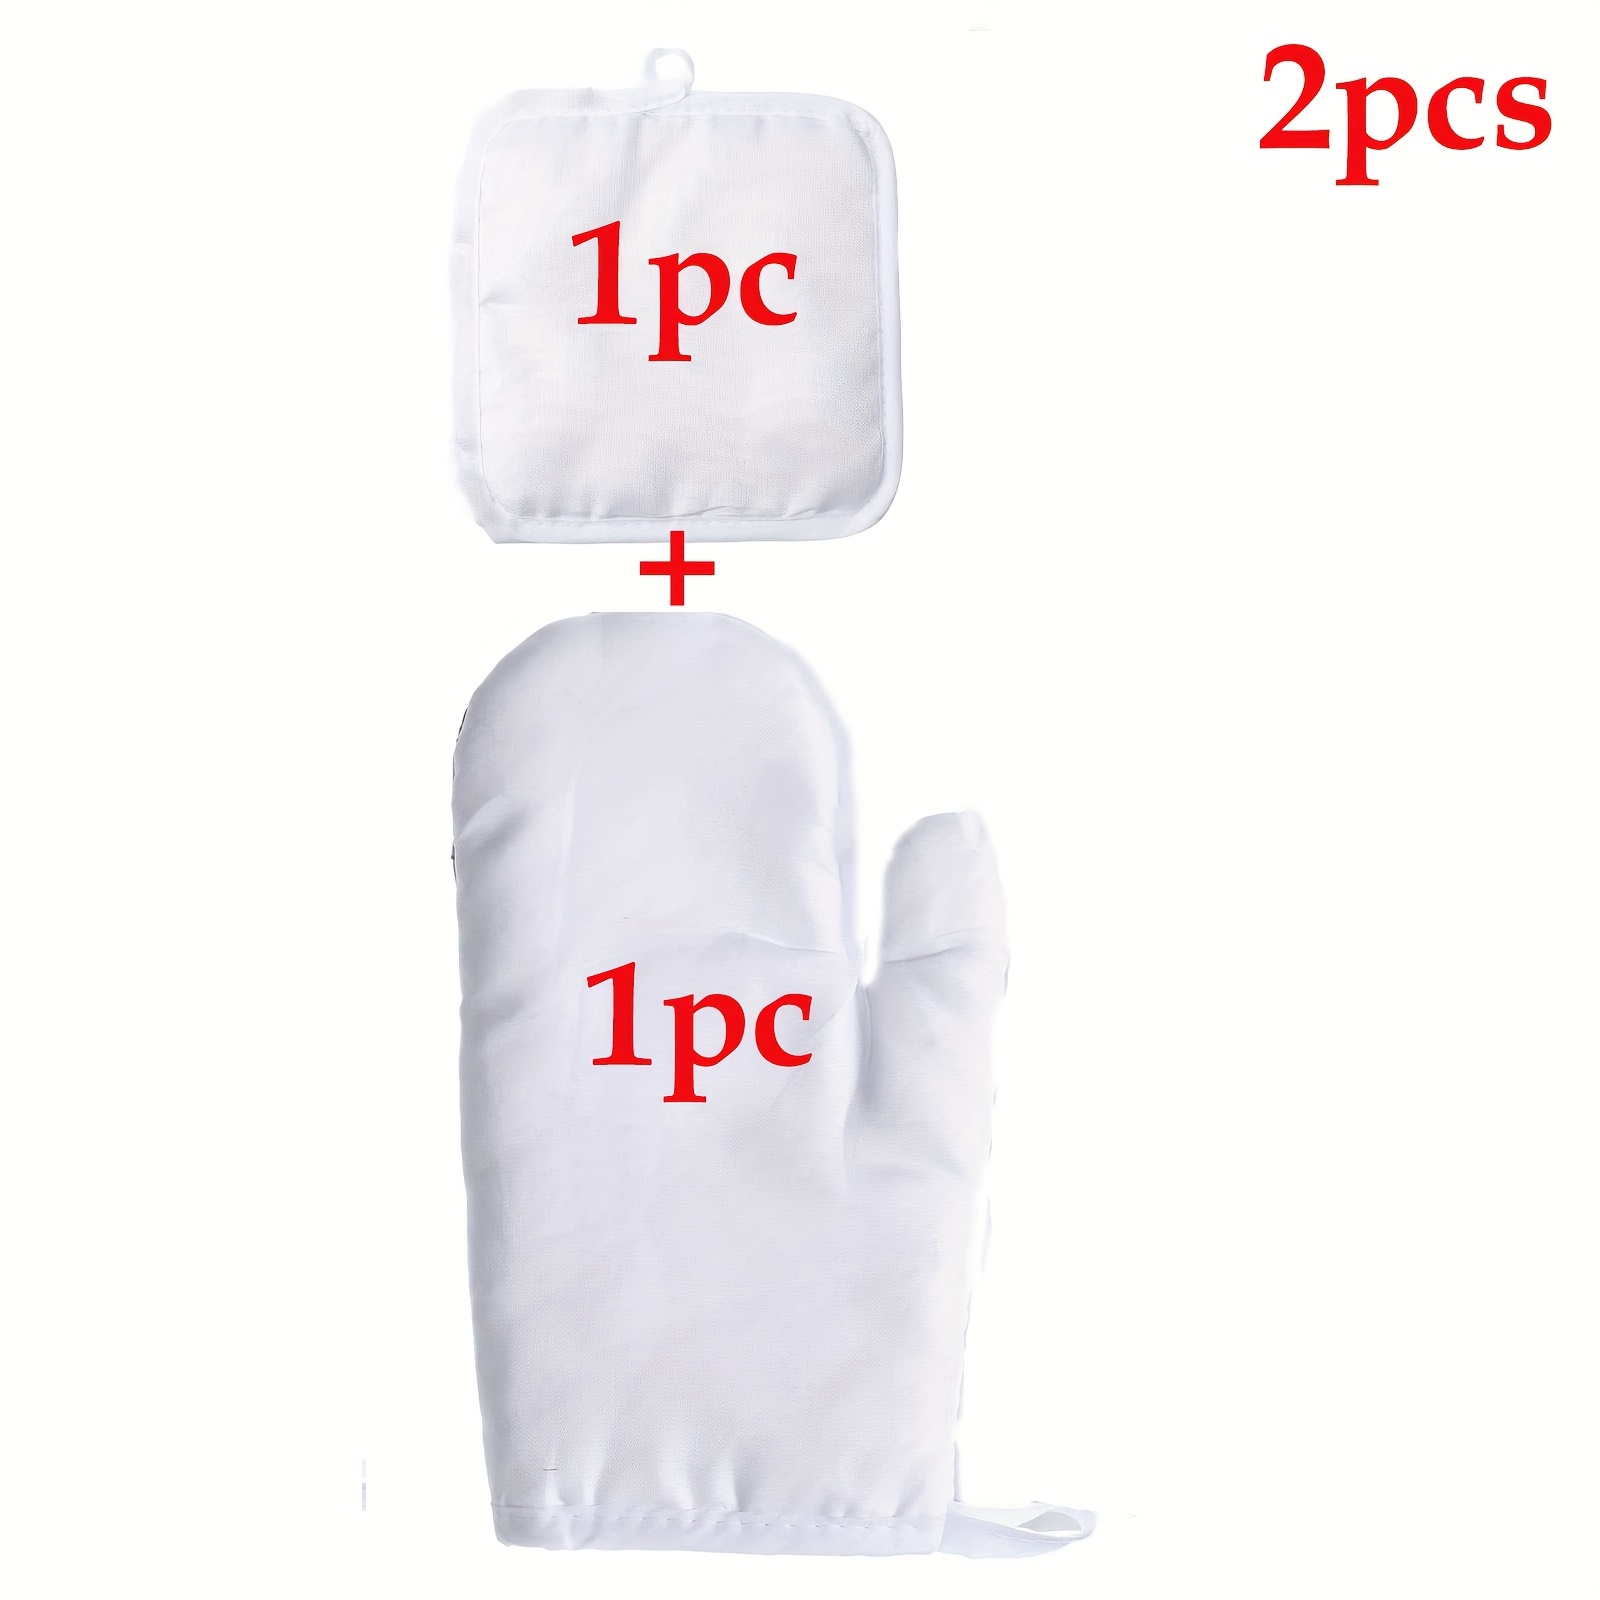 Pot Holders and Oven Mitts Sets 2PCS High Heat Resistant Gloves